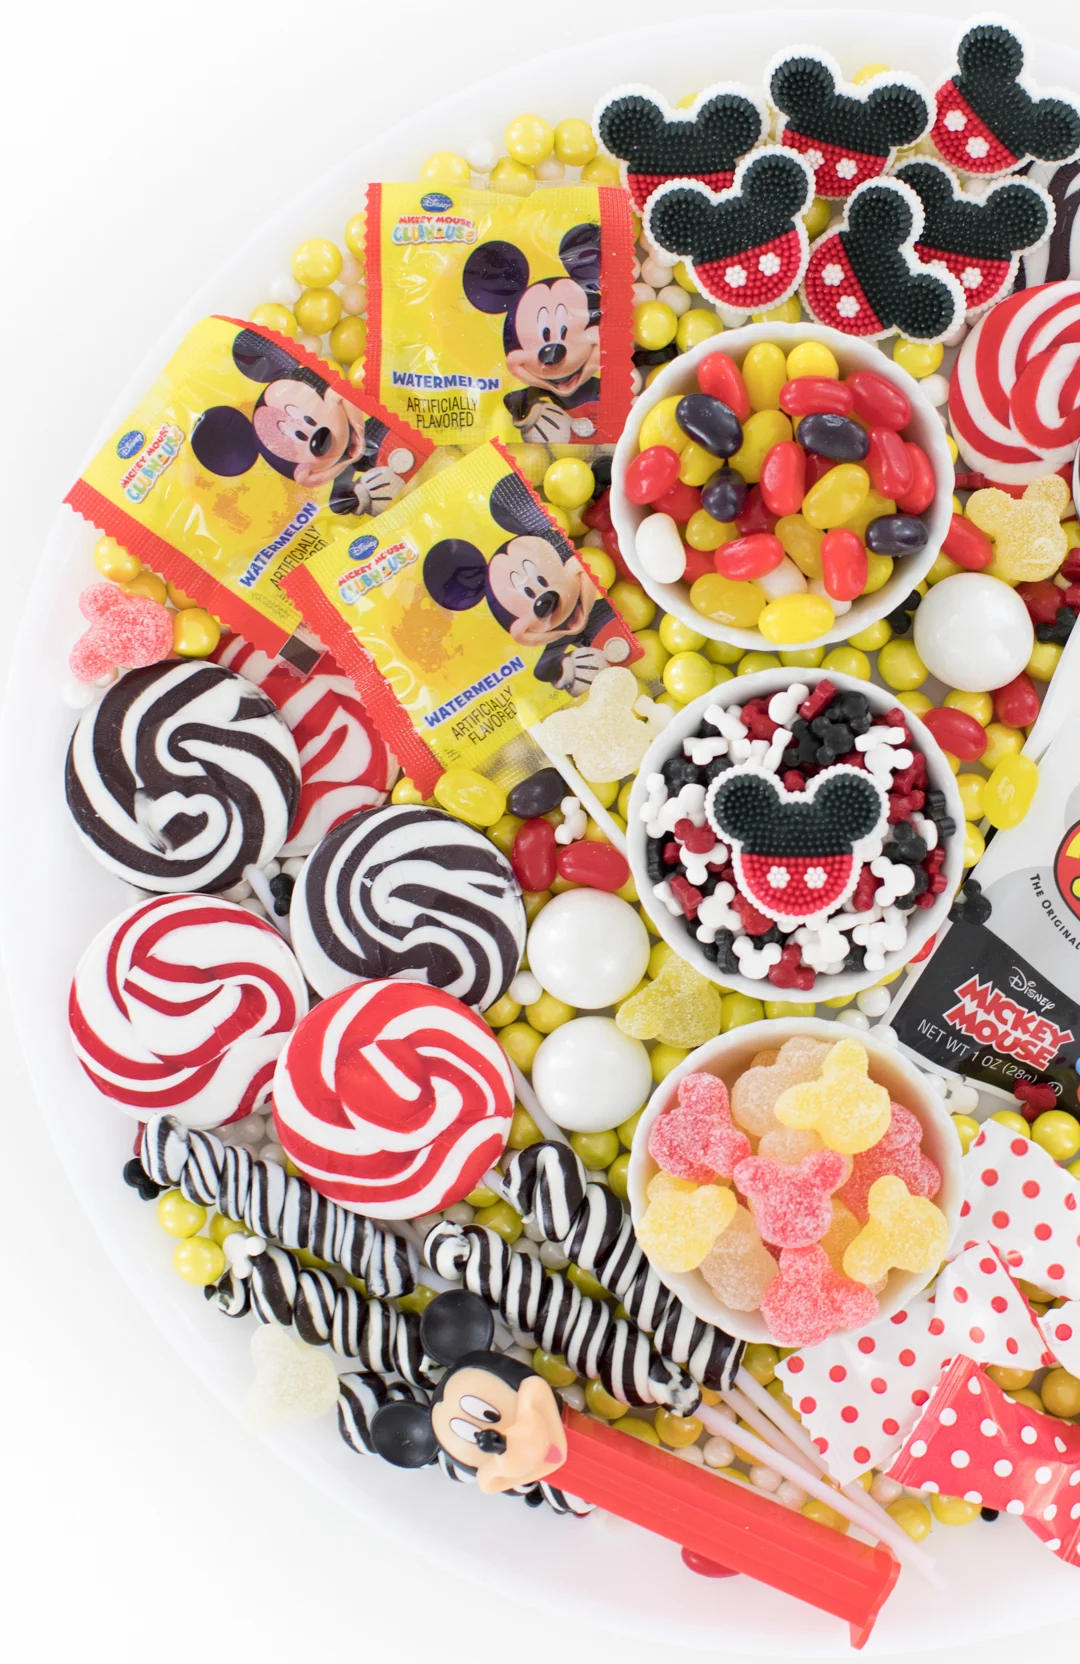 disney mickey mouse party platter filled with mickey candies and lollipops